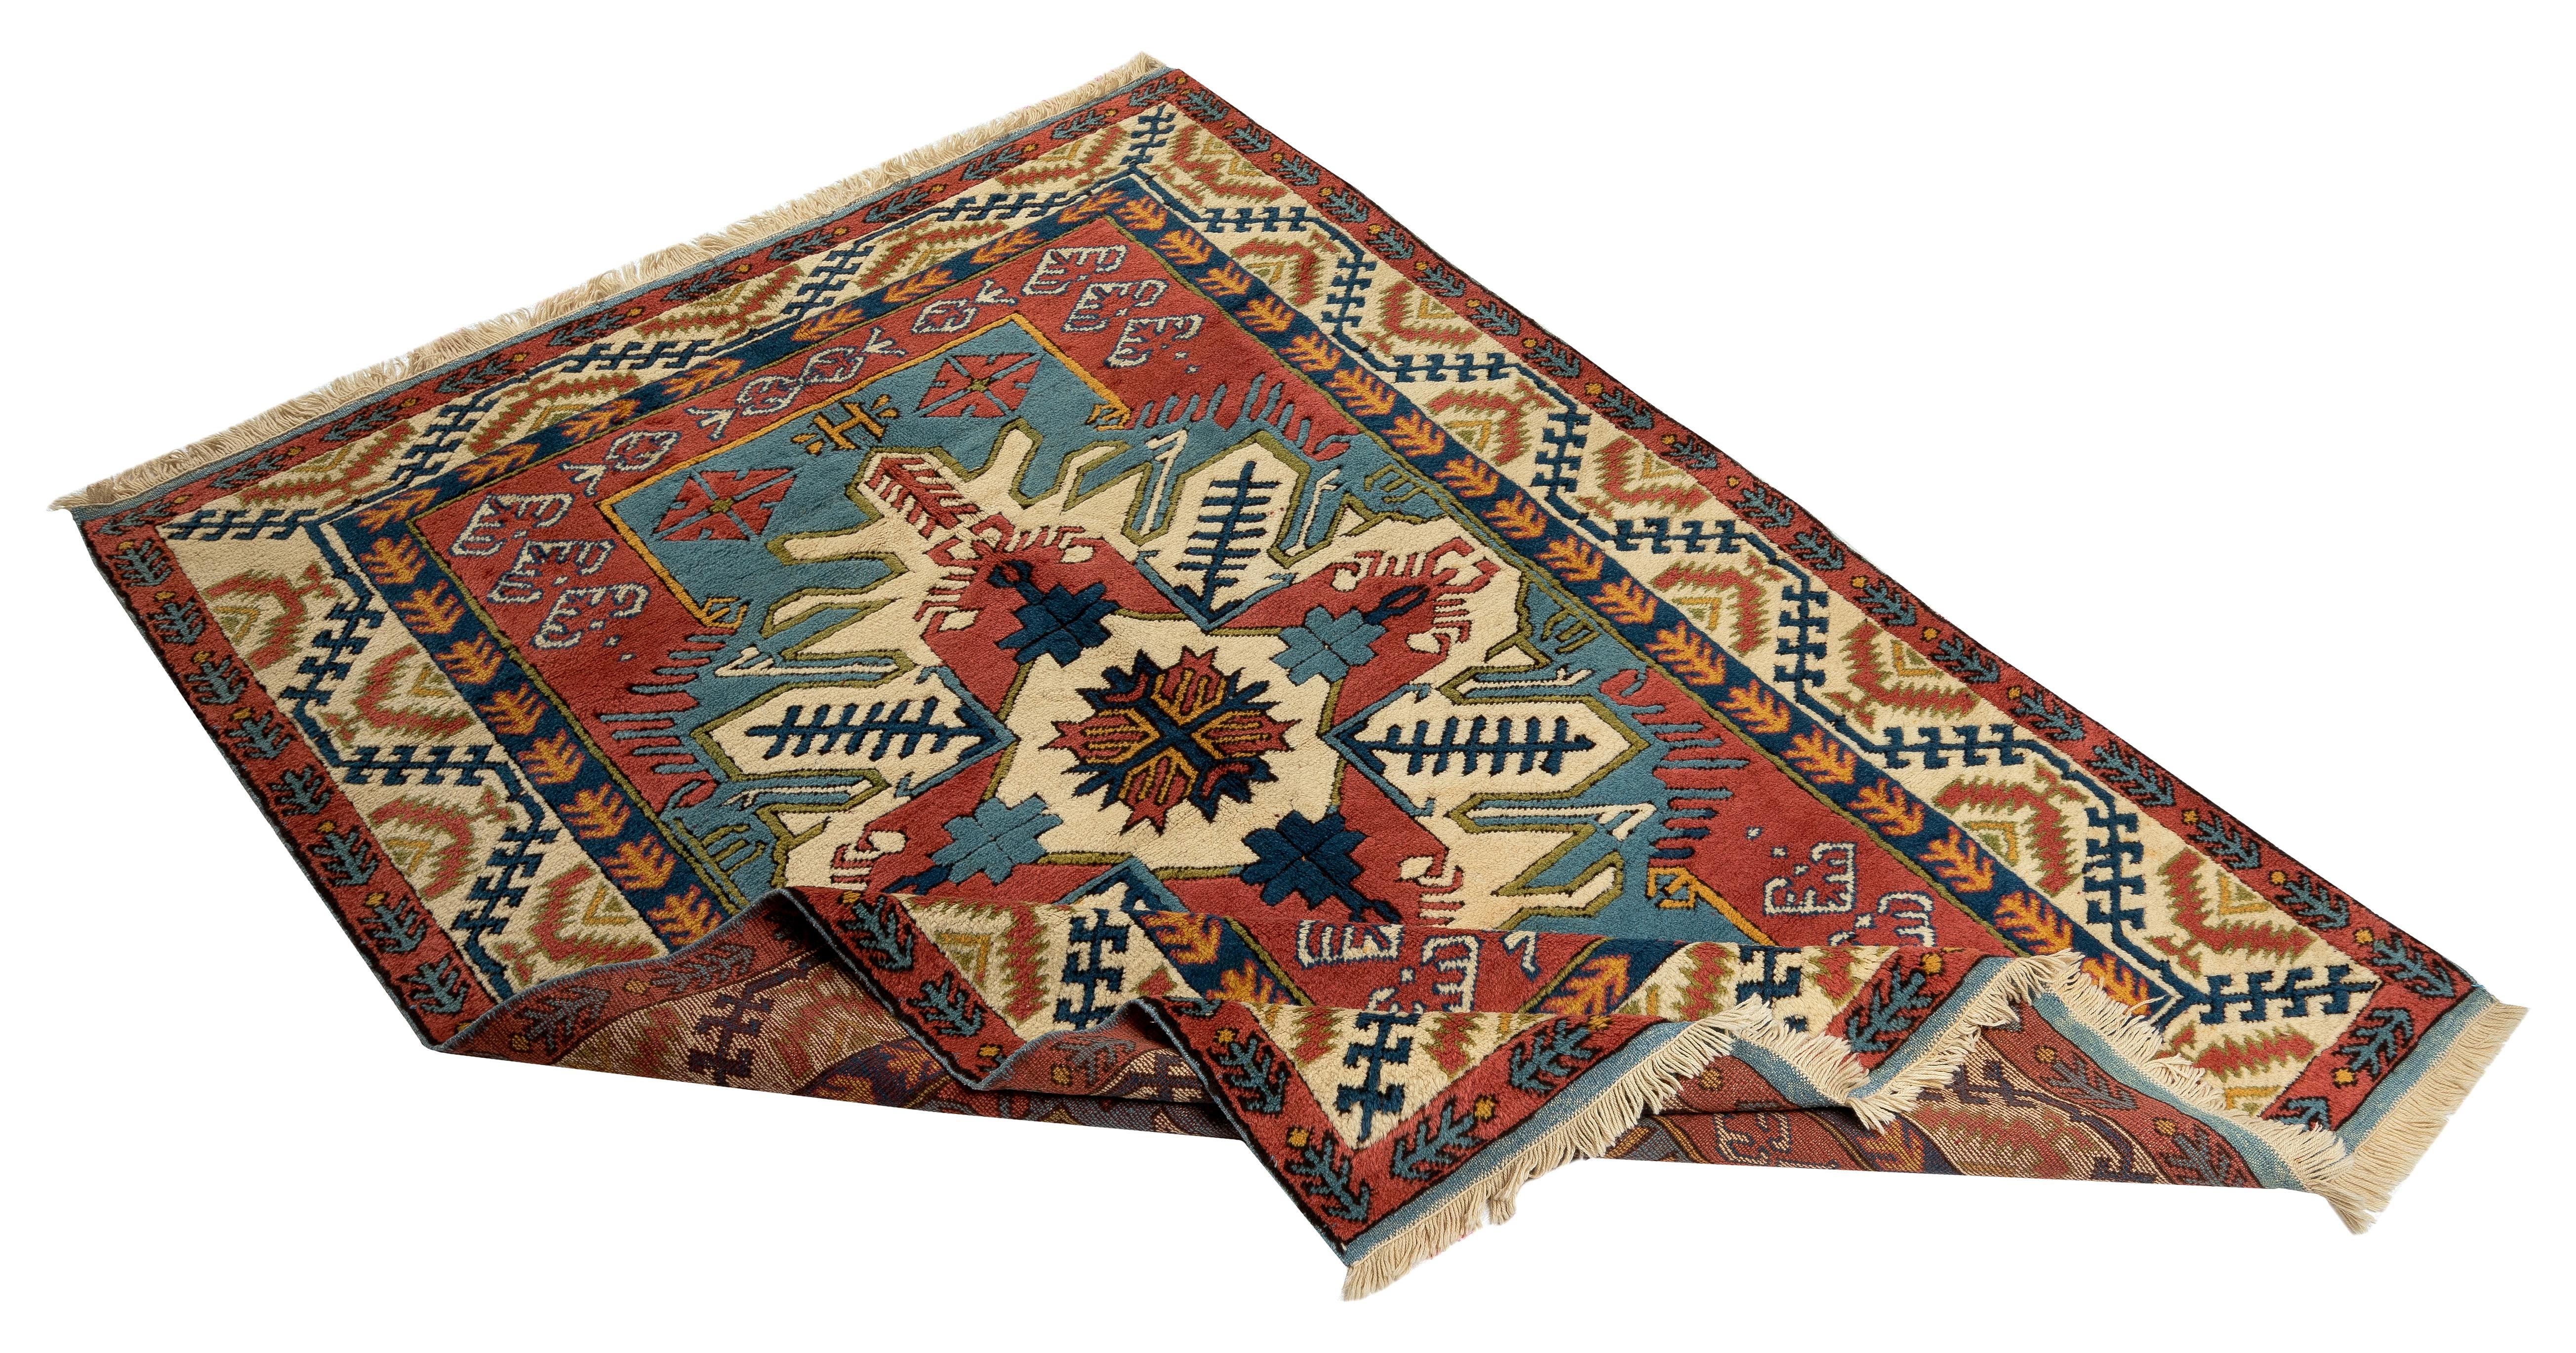 A brand new hand-knotted Turkish rug with excellent, lustrous, soft medium wool pile. The rug features a geometric latch-hook medallion design and a border decorated with half latch hook medallions and a running water motif all in a vivid color